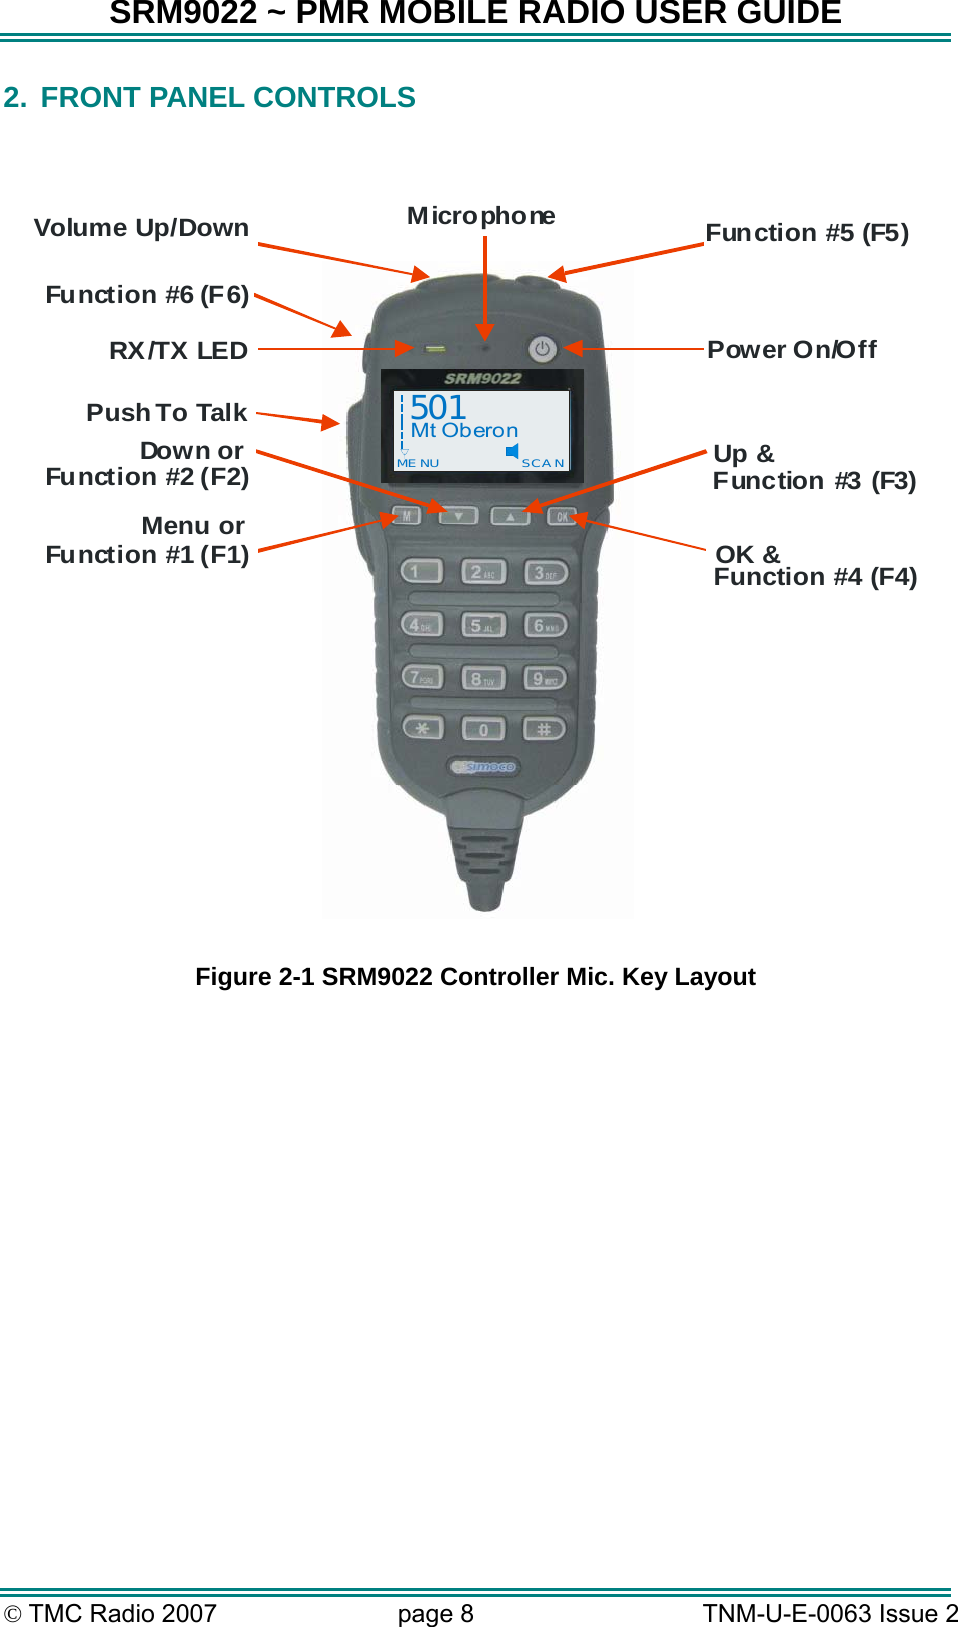 SRM9022 ~ PMR MOBILE RADIO USER GUIDE © TMC Radio 2007  page 8   TNM-U-E-0063 Issue 2 2.  FRONT PANEL CONTROLS    Power On/OffFunction #5 (F5)Volume Up/DownFunction #6 (F6)RX/TX LEDMicrophonePush To  TalkMenu orFunction #1 (F1)Function #2 (F2)Dow n or Up &amp;Function #3 (F3)OK &amp;Function #4 (F4)501Mt OberonME NU SCA N  Figure 2-1 SRM9022 Controller Mic. Key Layout  